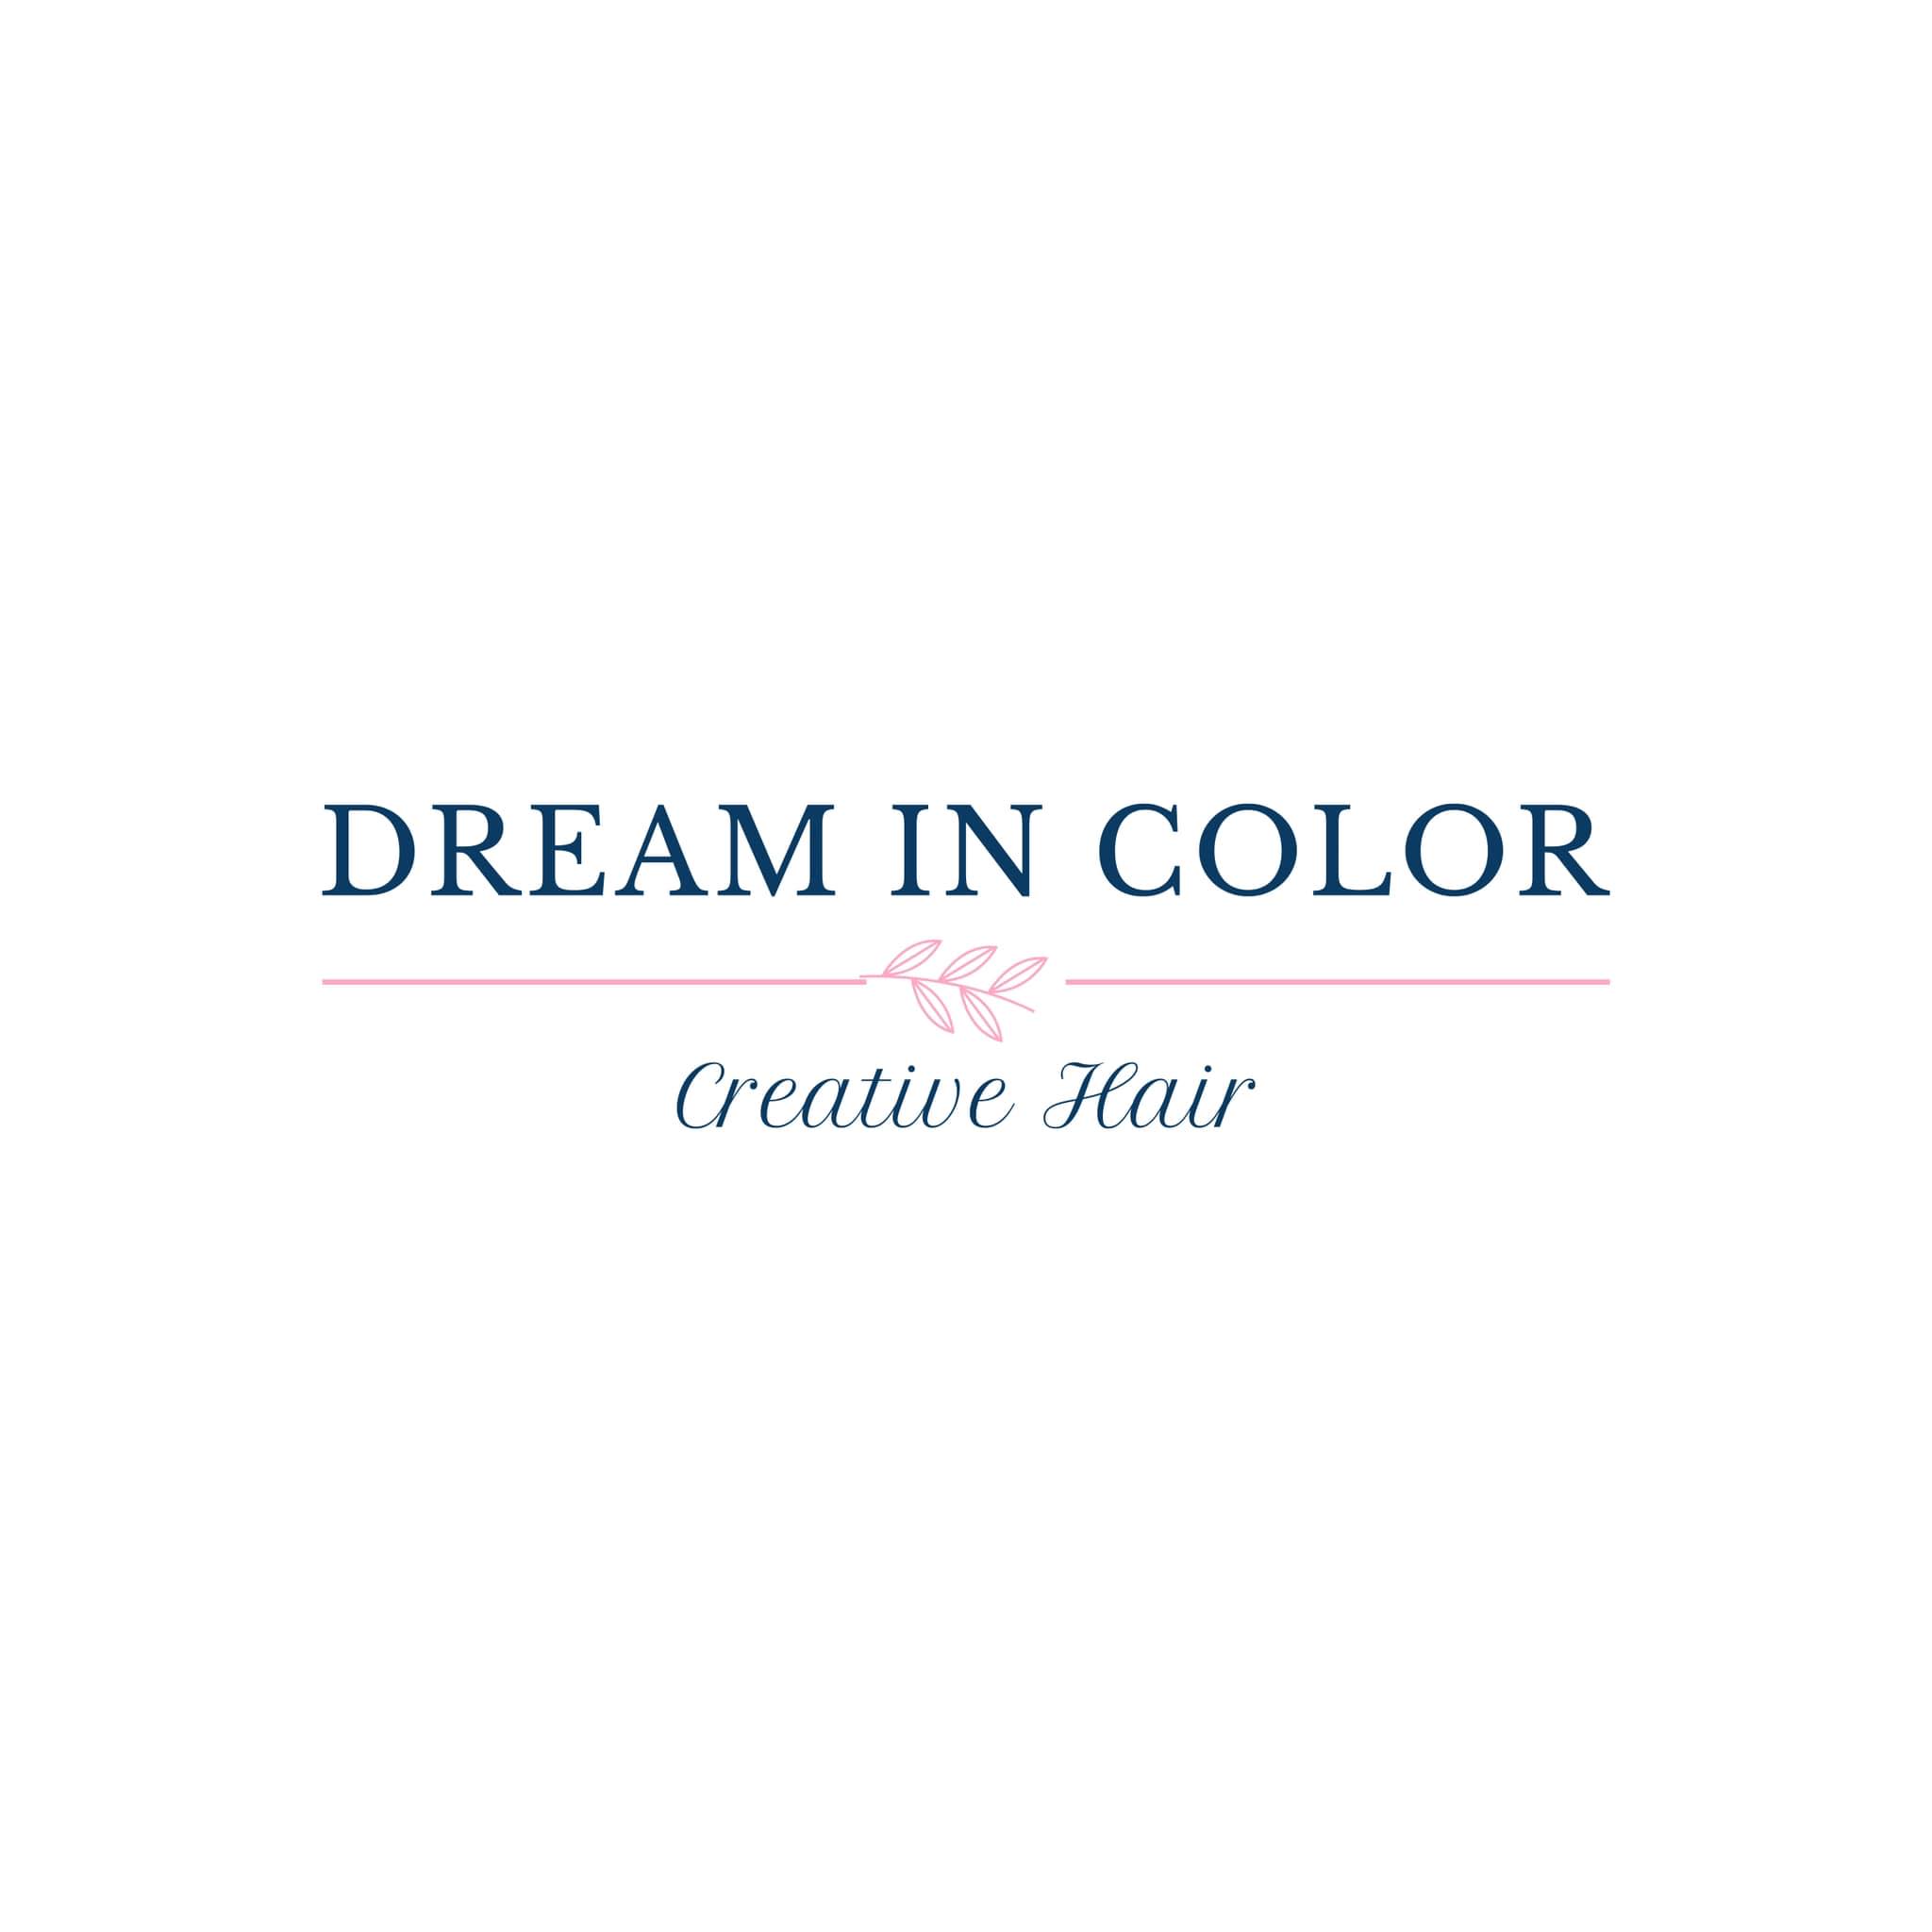 Dream In Color 3009 Eastern Blvd B, Middle River Maryland 21220